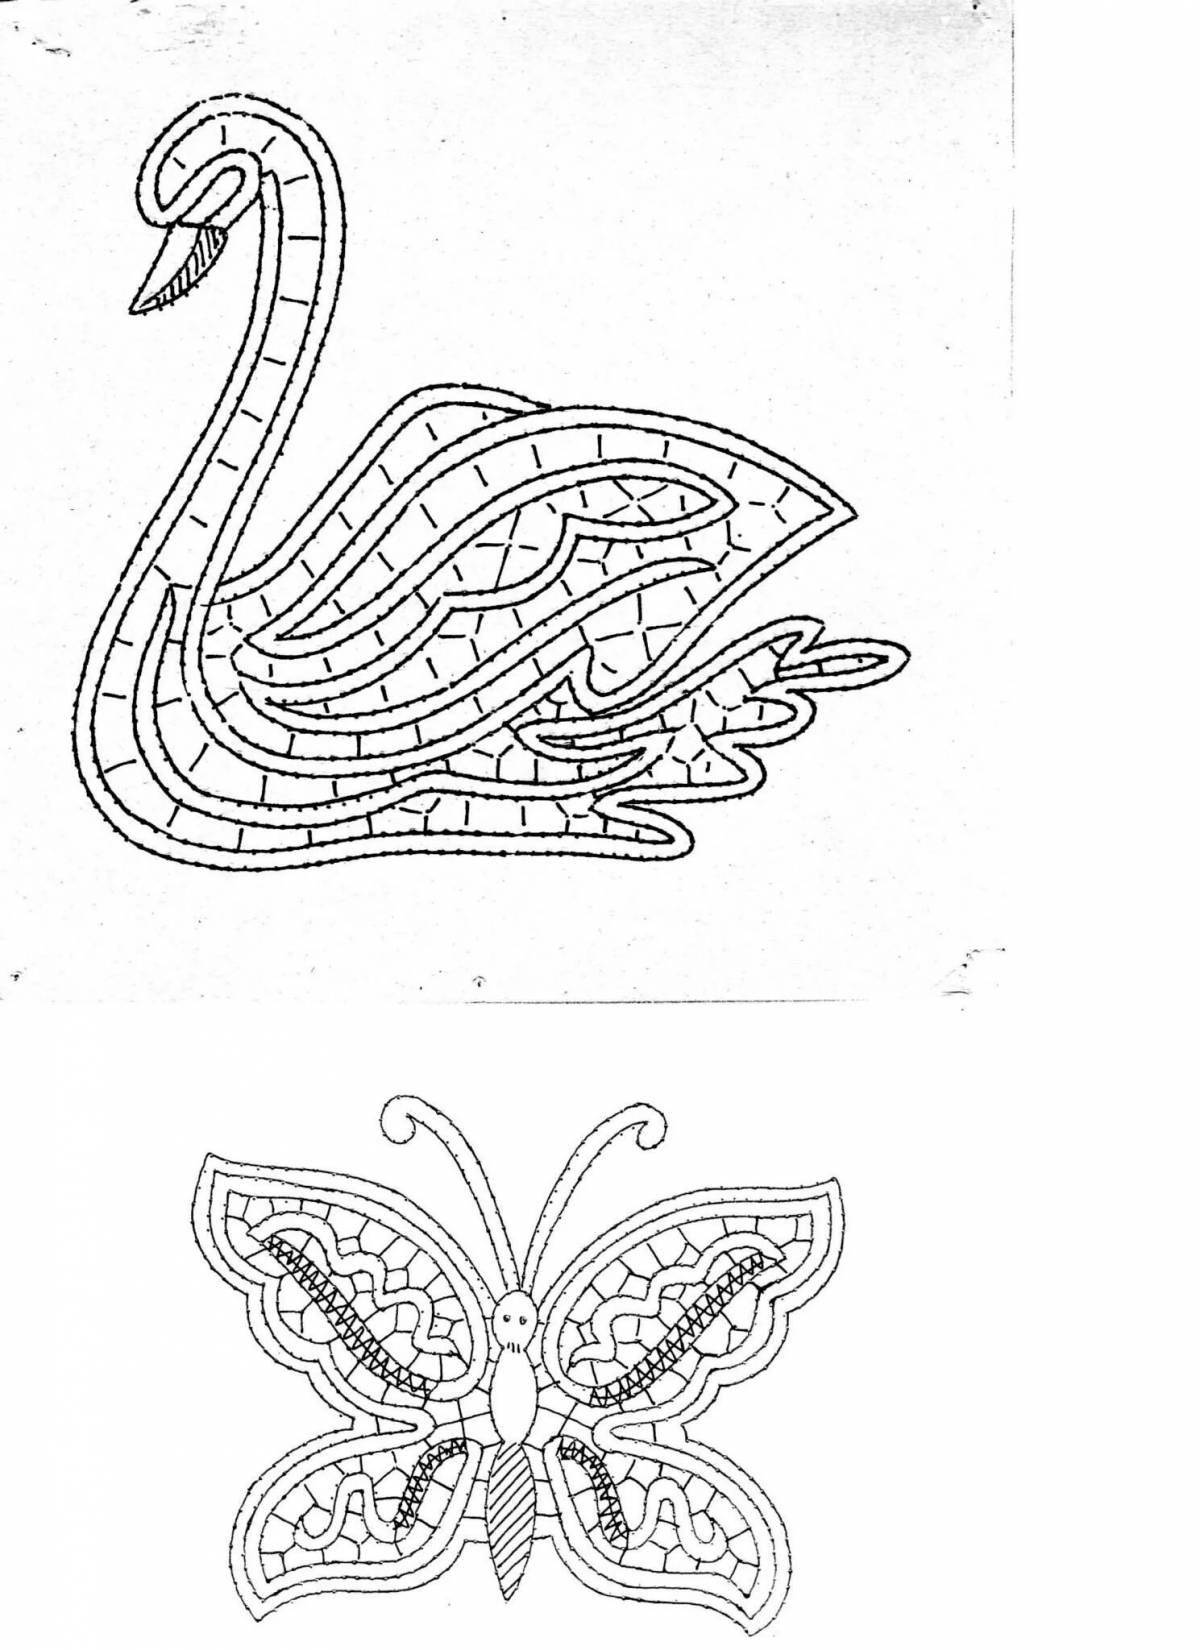 Intricate coloring of Vologda lace